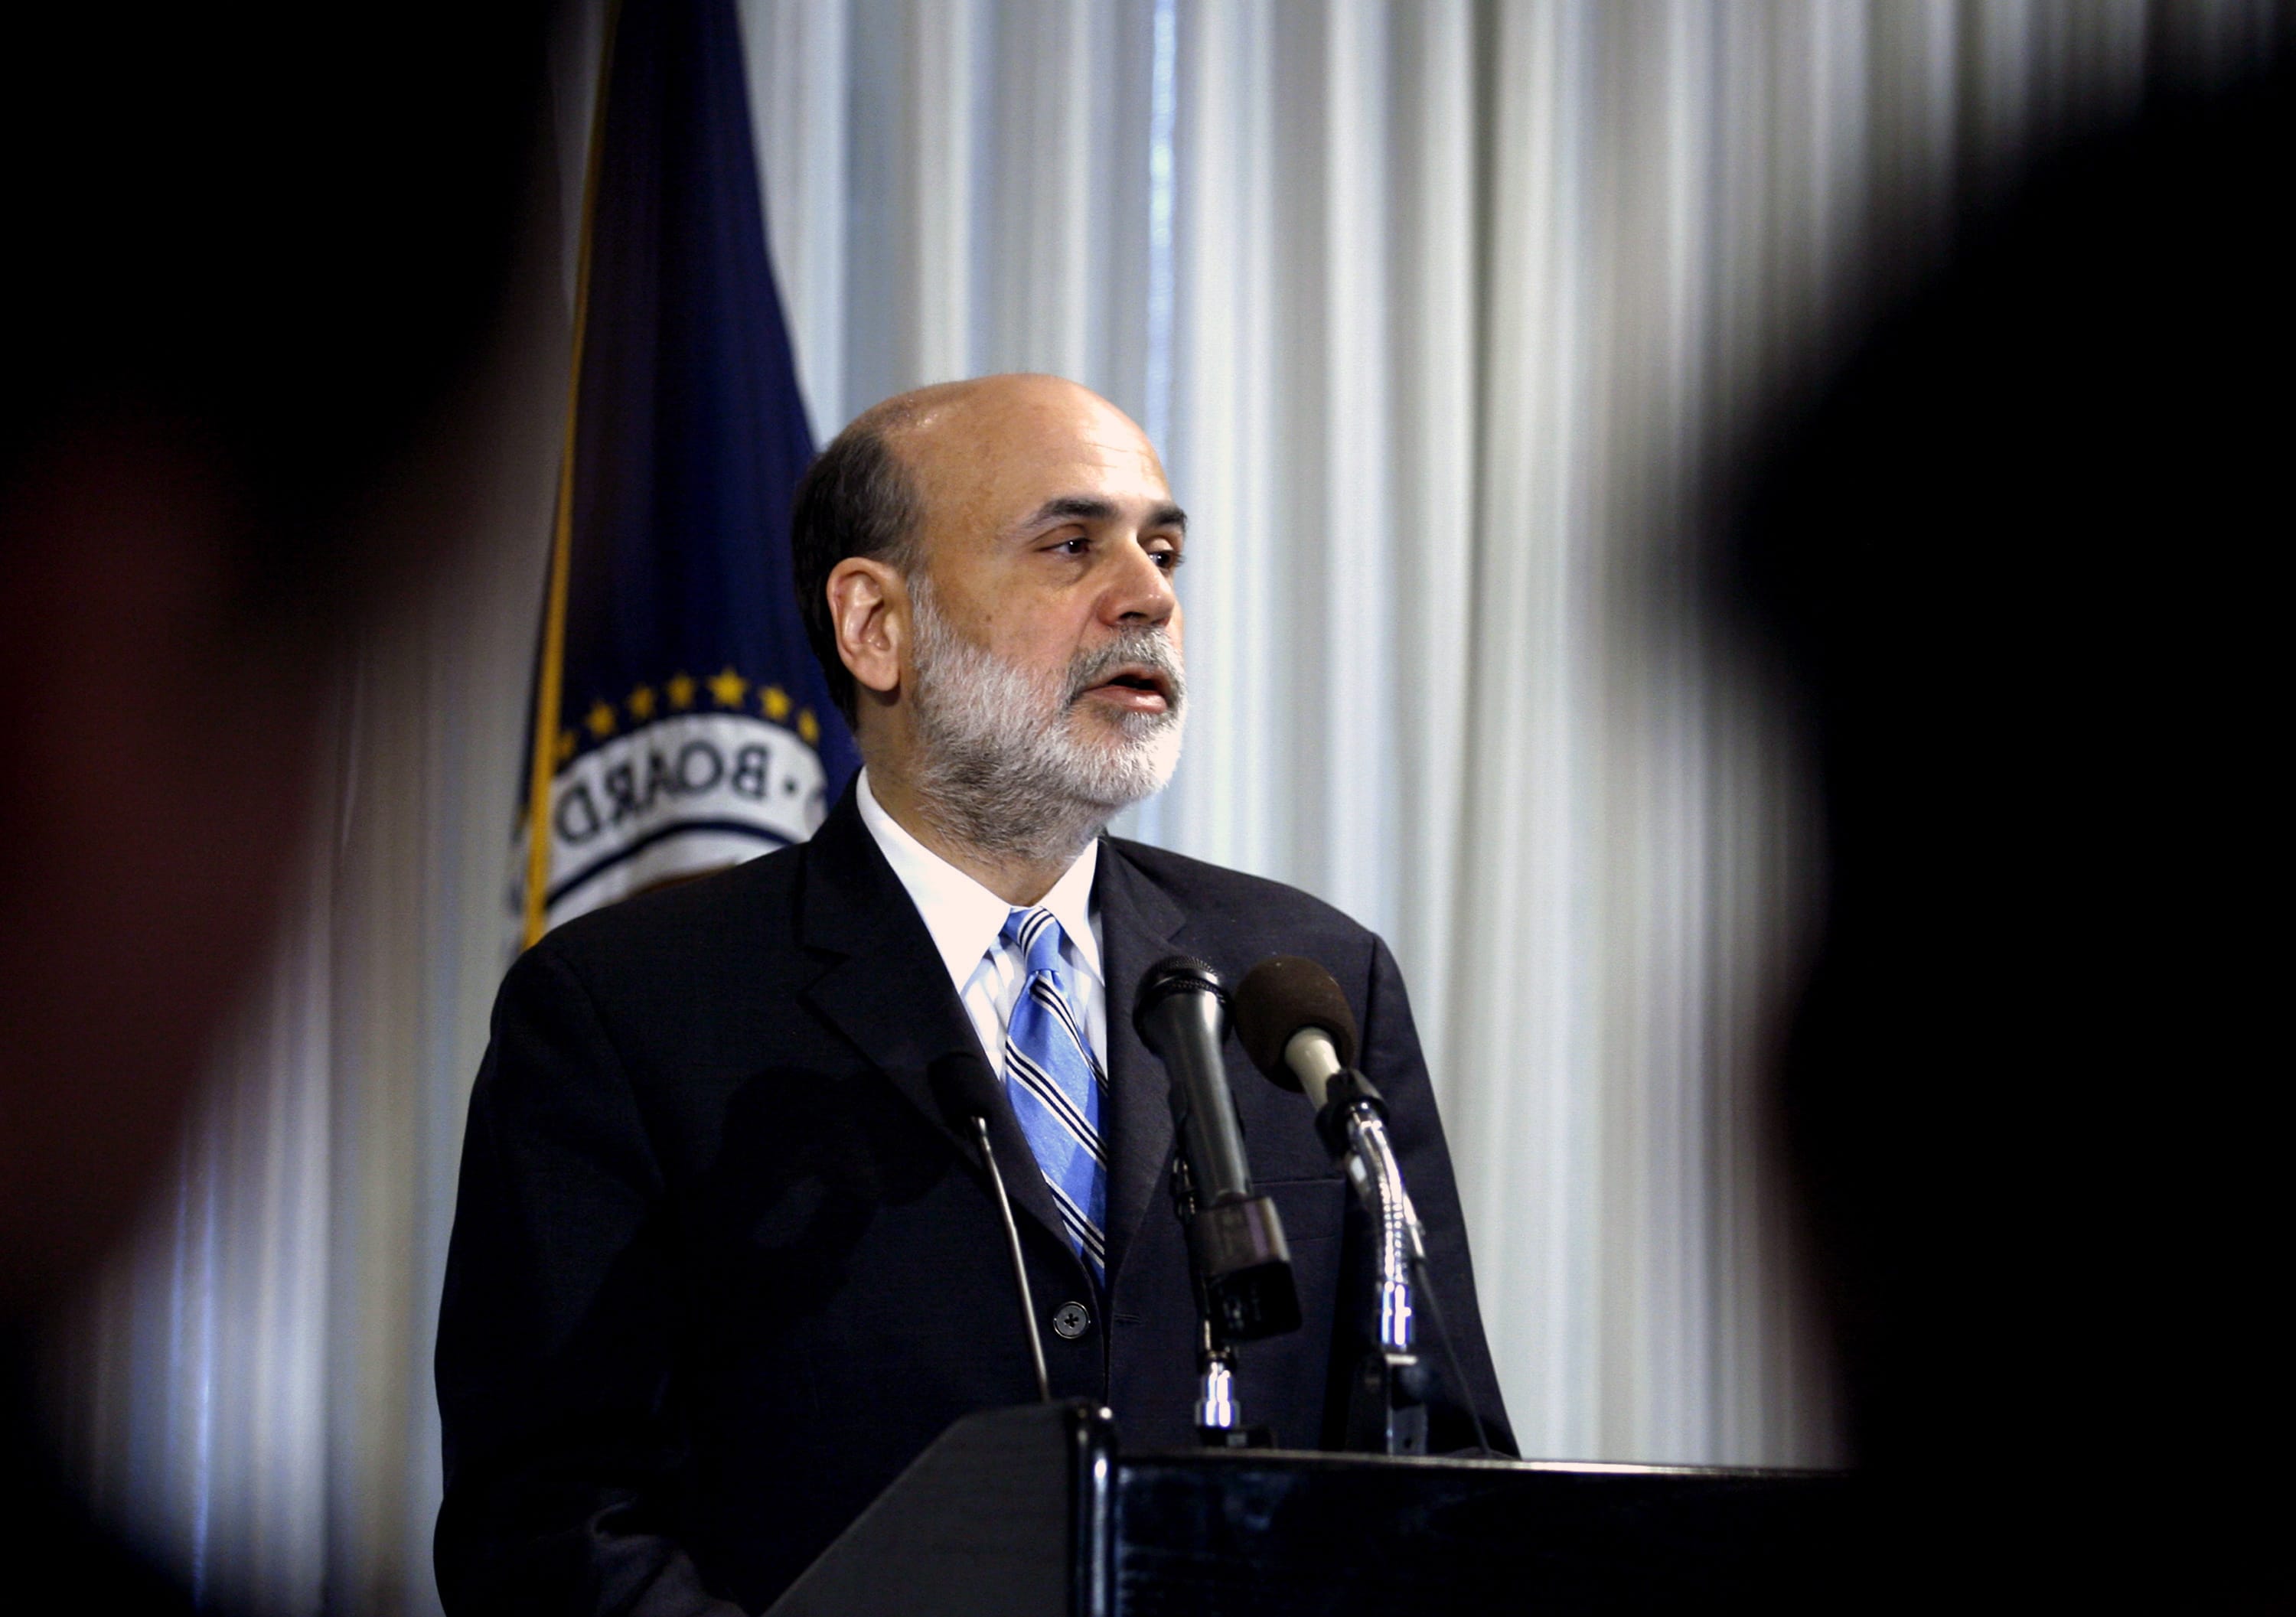 Ben Bernanke, then chairman of the Federal Reserve, speaks Dec. 4, 2008, on housing and housing finance, at the Federal Reserve in Washington.